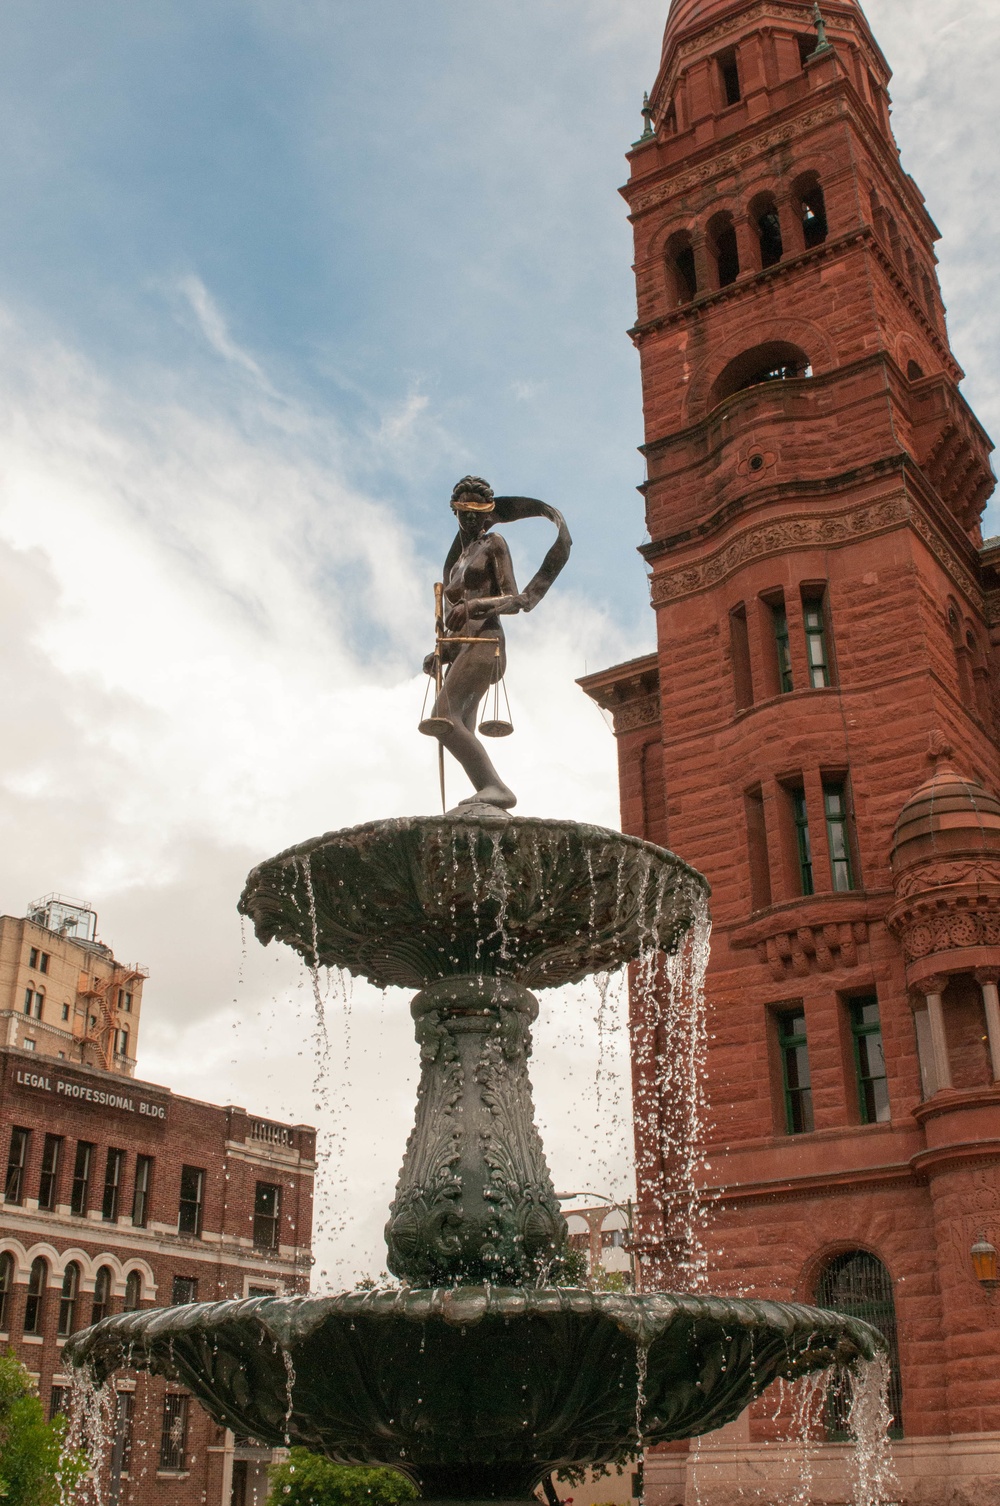 The Lady Justice Fountain